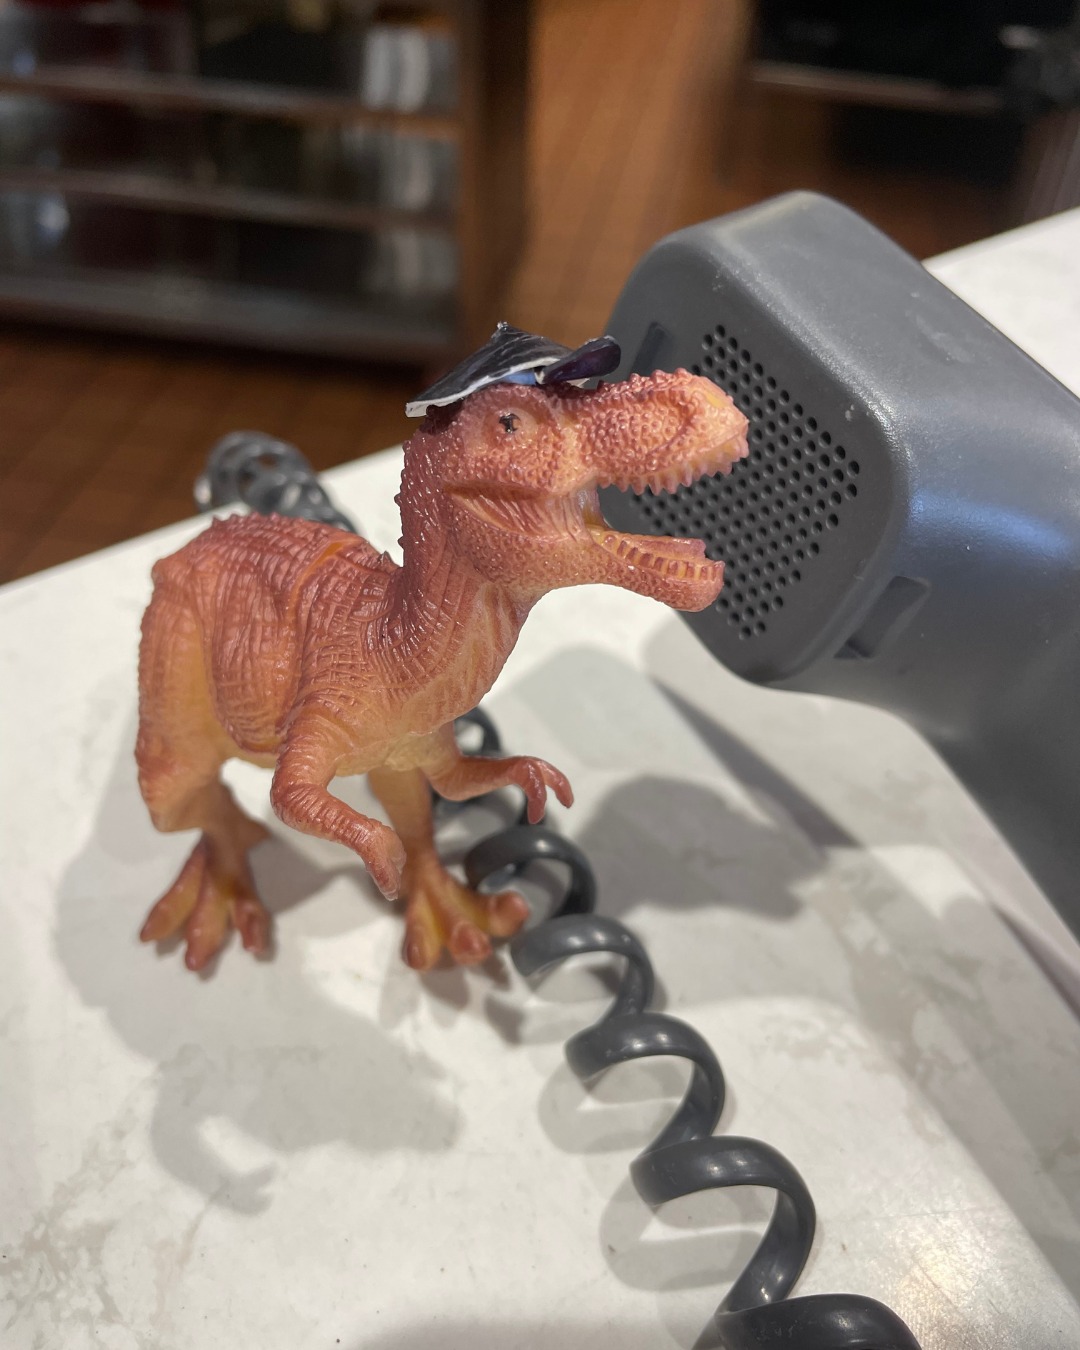 Bitey the toy dinosaur answering the phone at Domino's pizza.